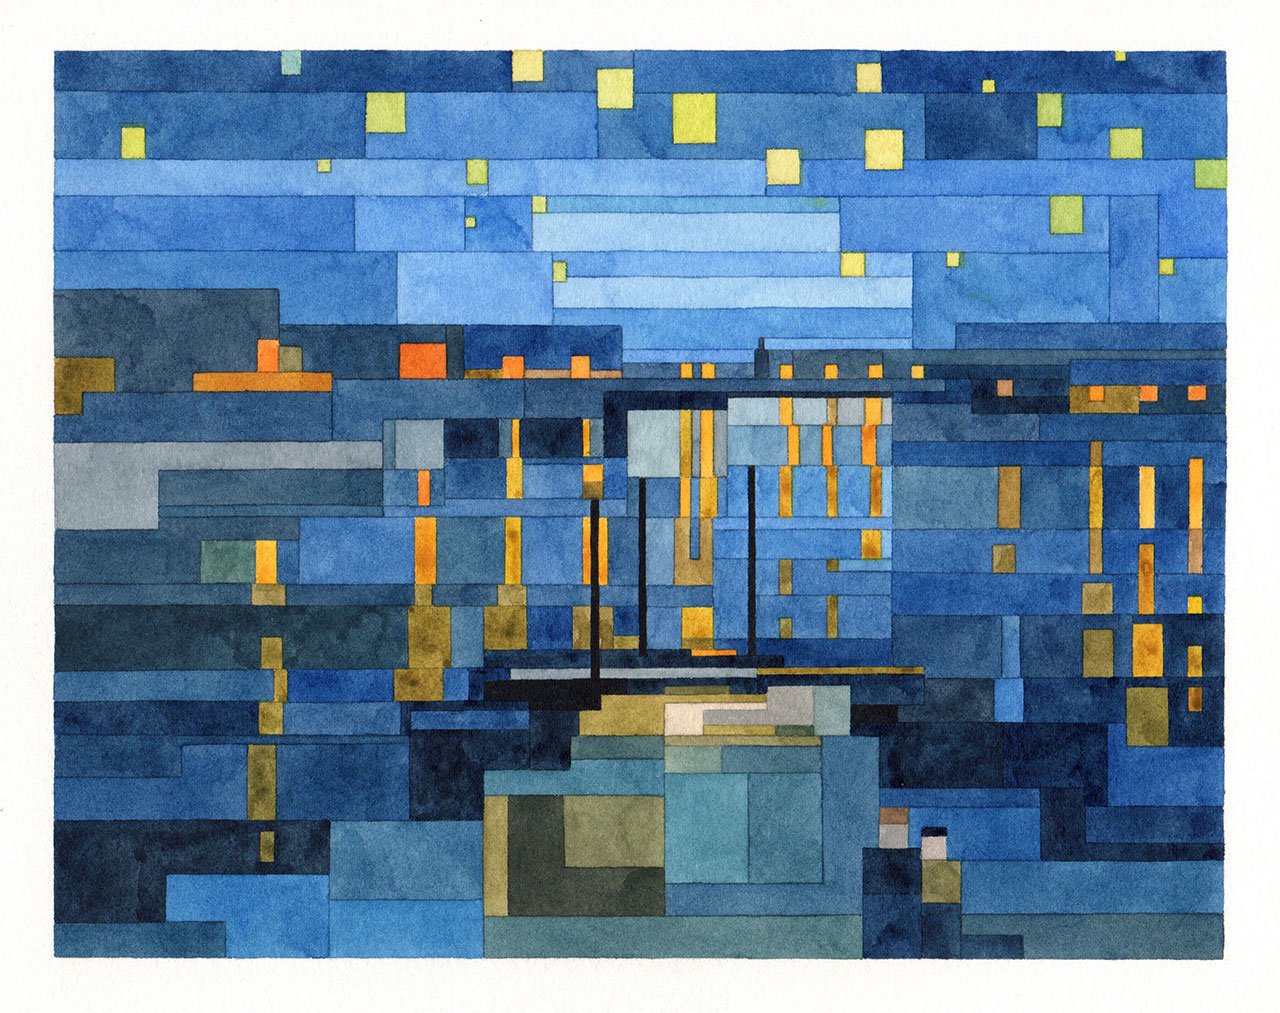 New Pixel Watercolour Paintings by Adam Lister will tell us a history